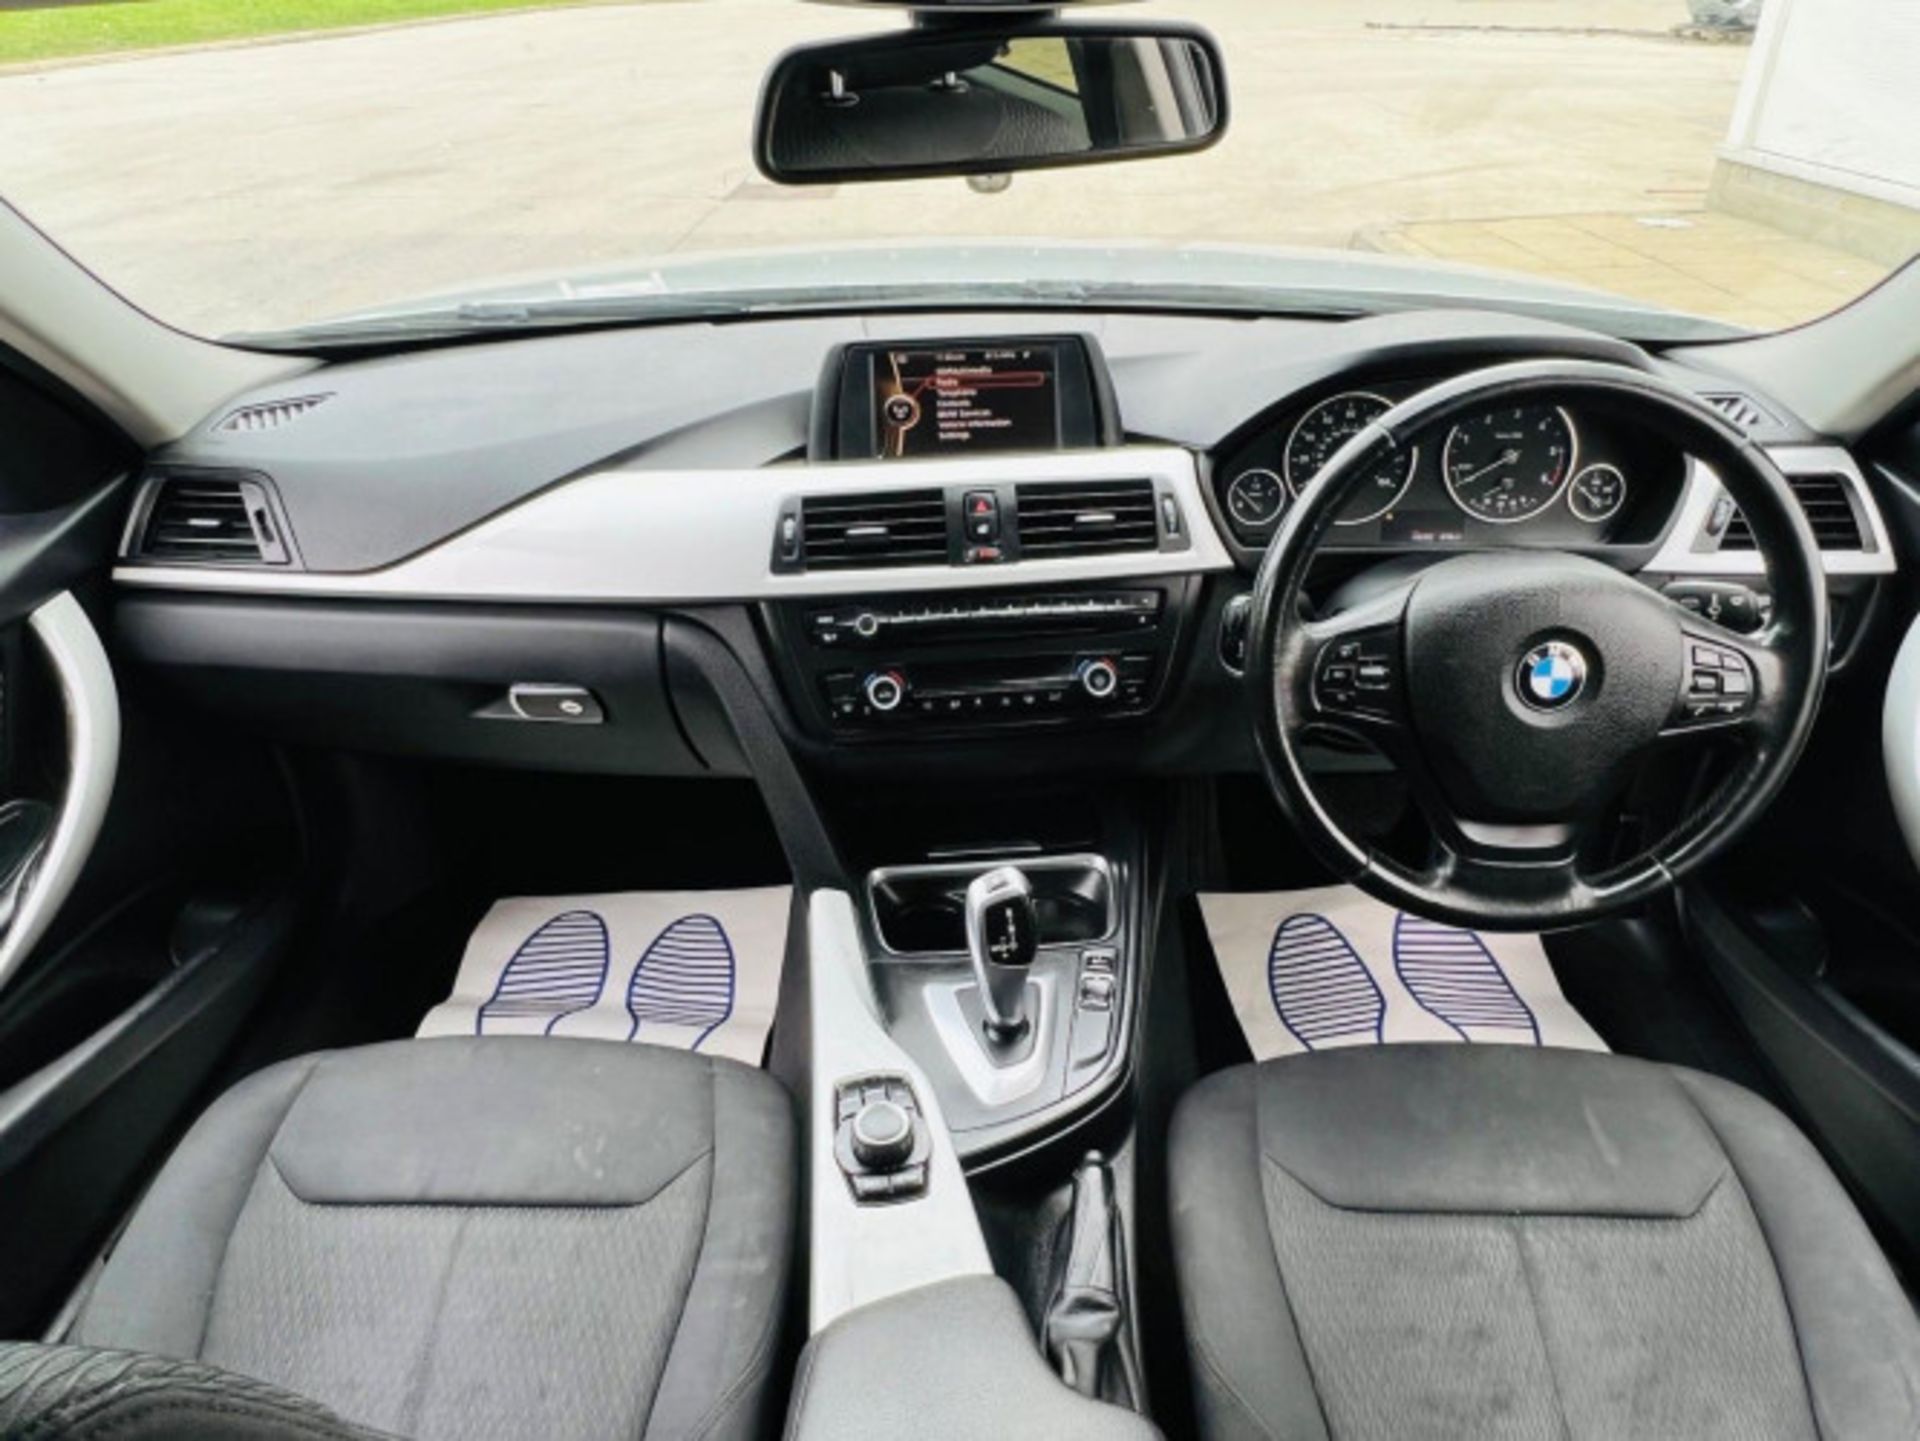 BMW 3 SERIES 2.0 DIESEL ED START STOP - A WELL-MAINTAINED GEM >>--NO VAT ON HAMMER--<< - Image 164 of 229